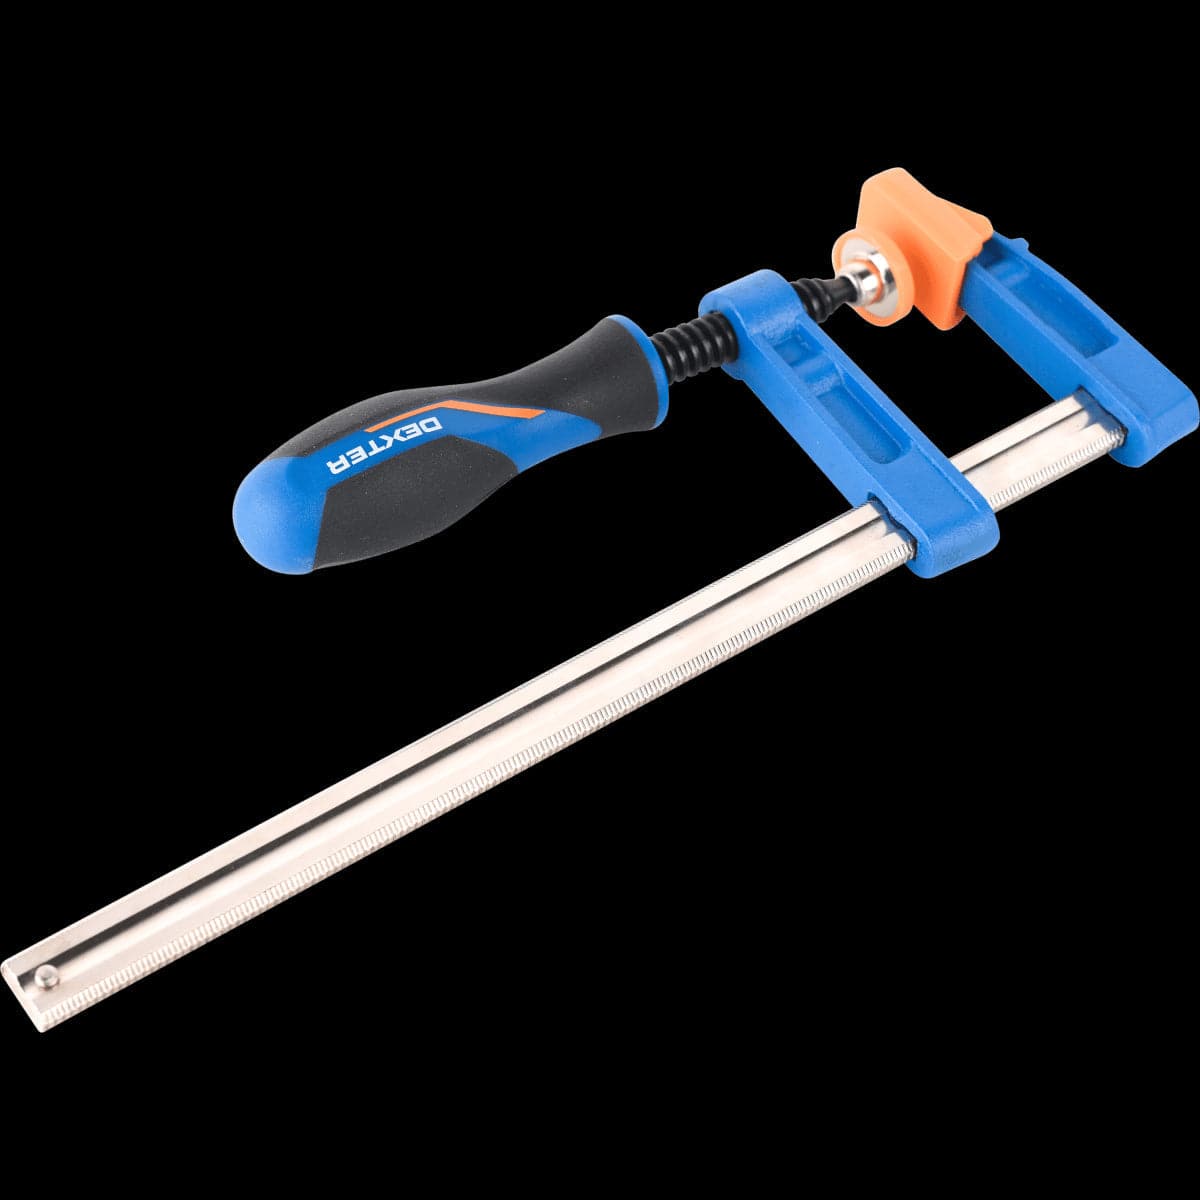 DEXTER CLAMP 50 MM, SAWING OPENING 200 MM, GALVANISED STEEL - best price from Maltashopper.com BR400000608